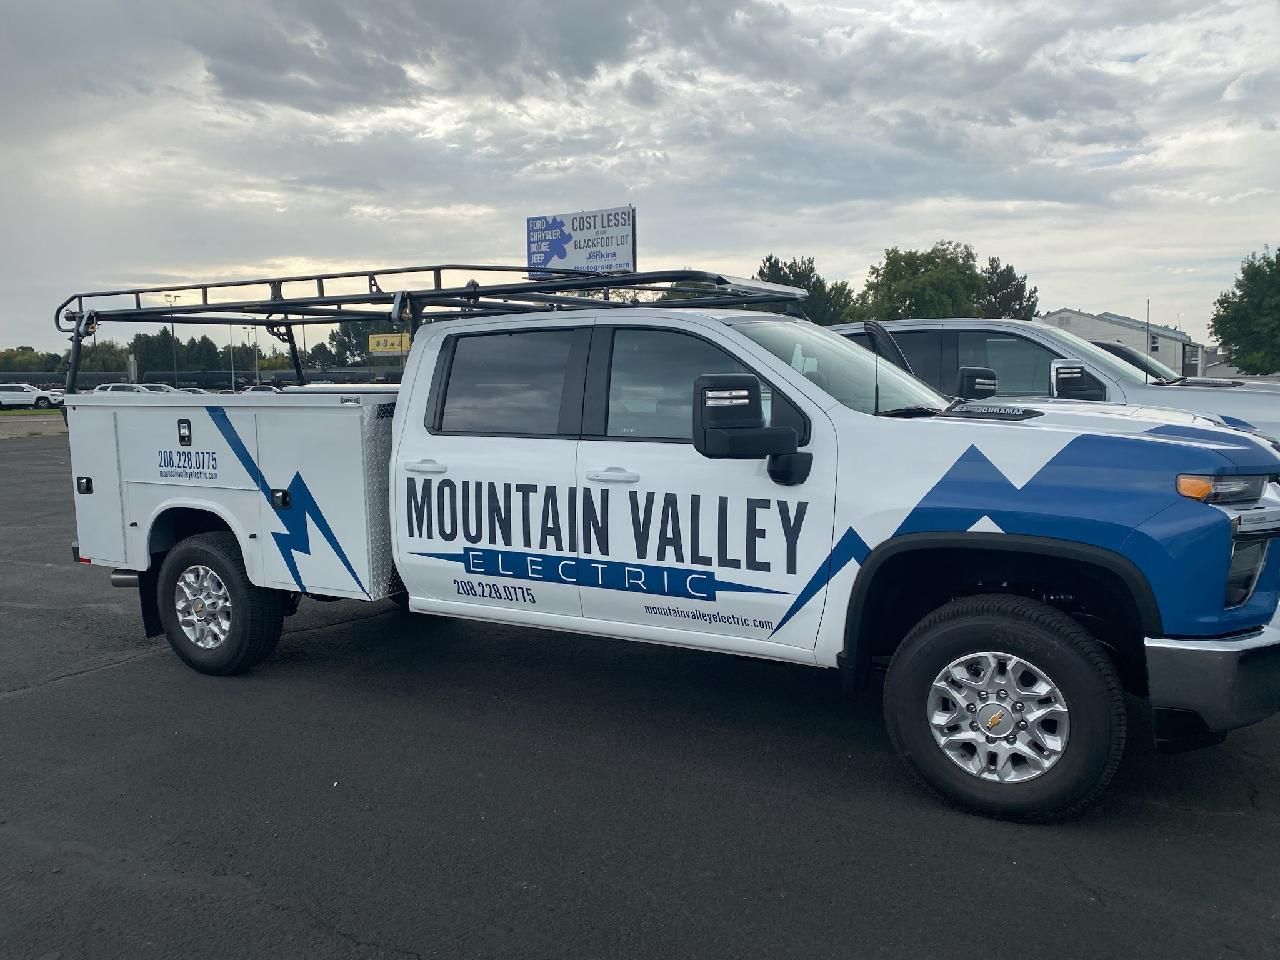 Mountain Valley Electric service truck